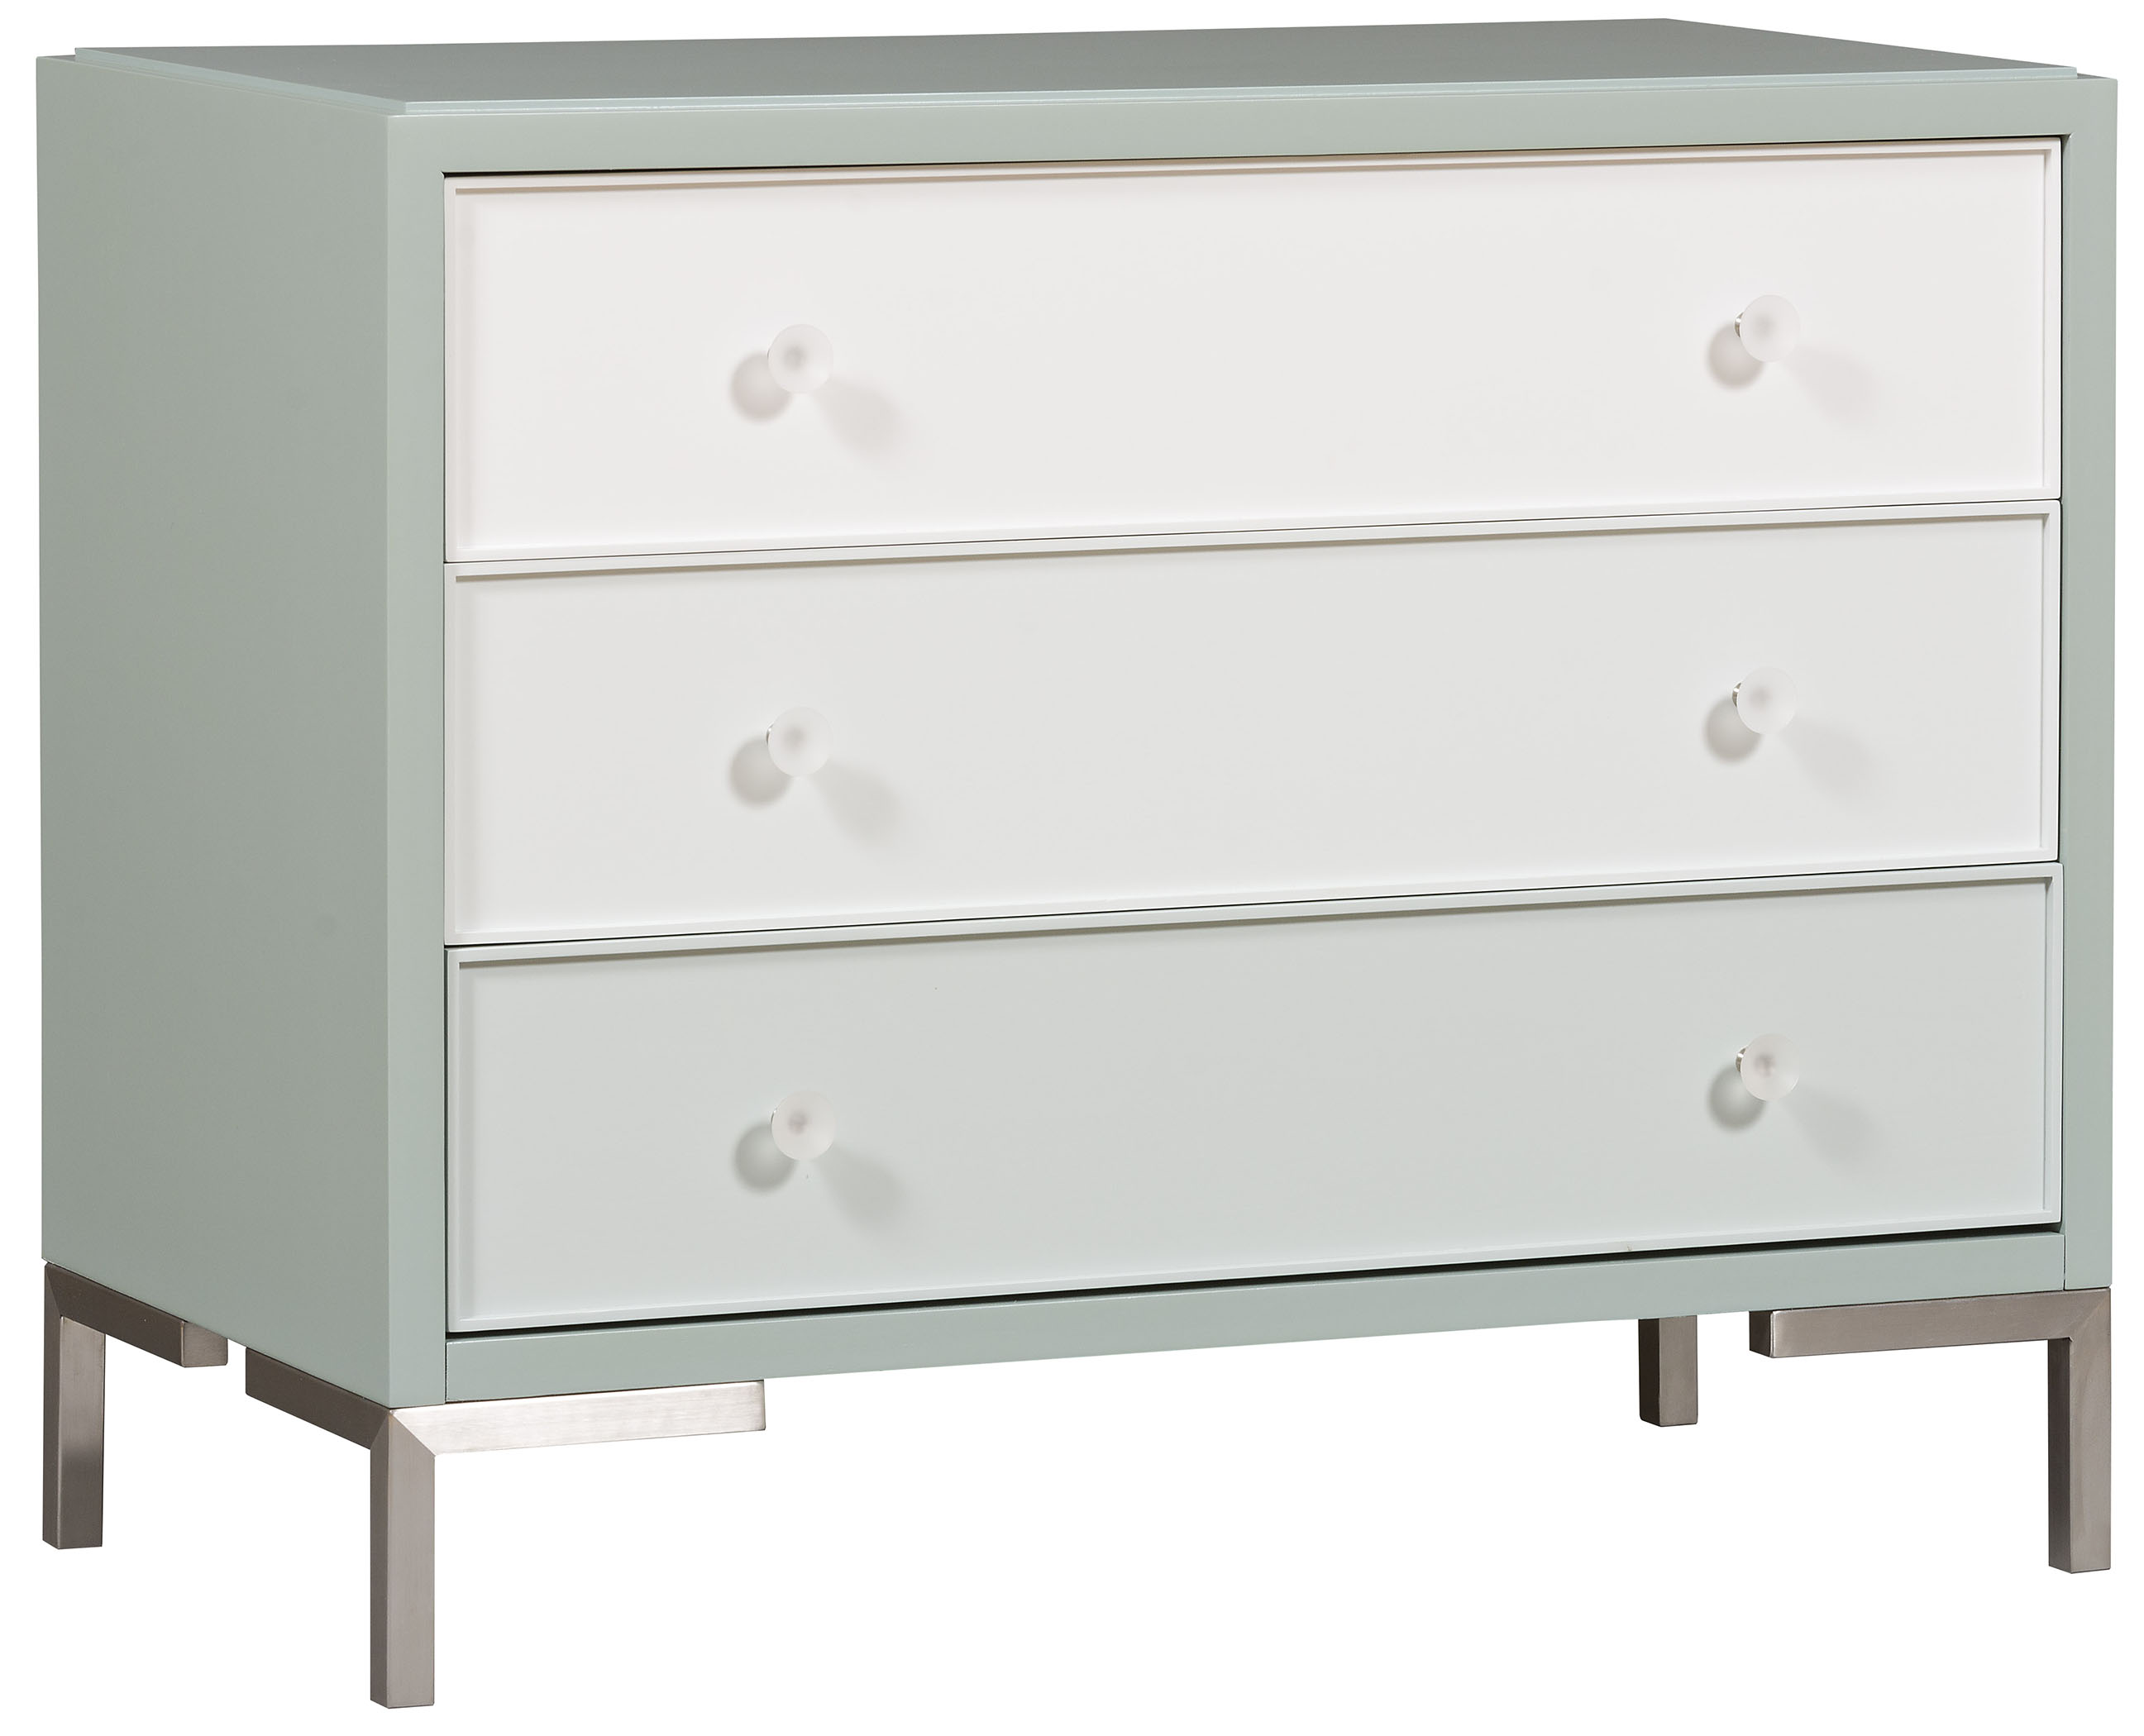 McKinney Nightstand CC03G - Our Products - Vanguard Furniture